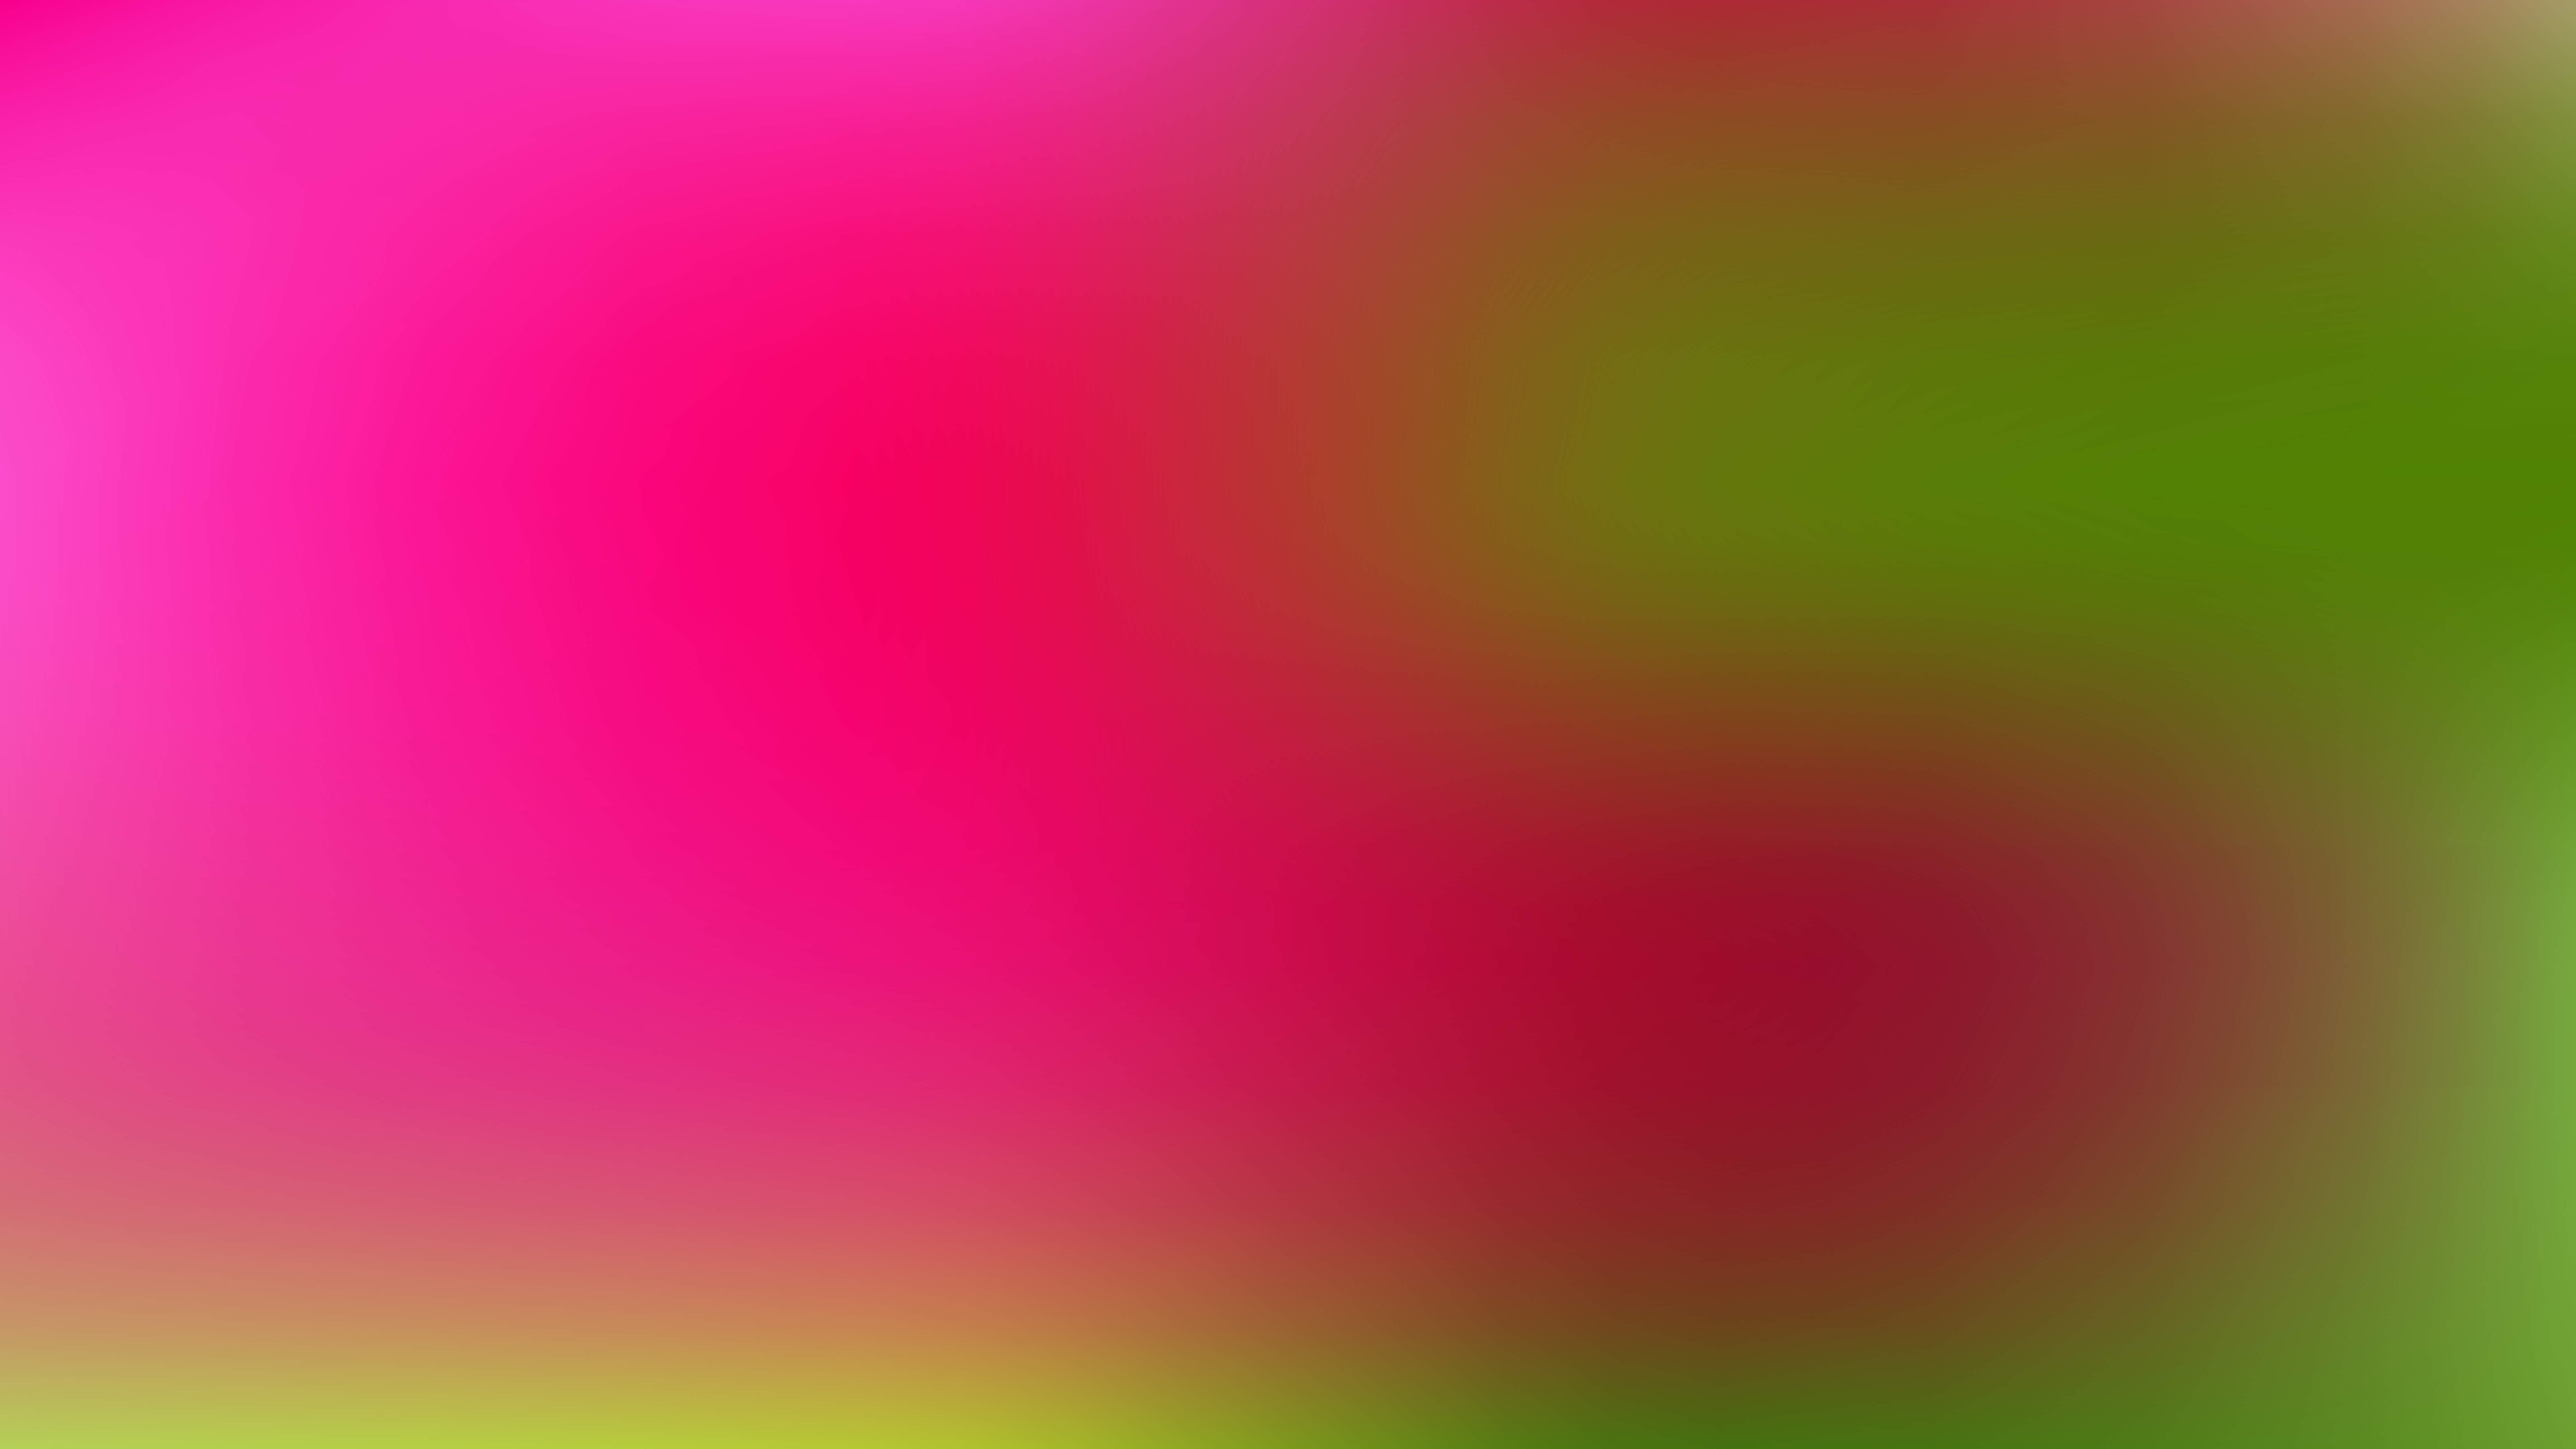 Free Pink and Green Blurry Background Image